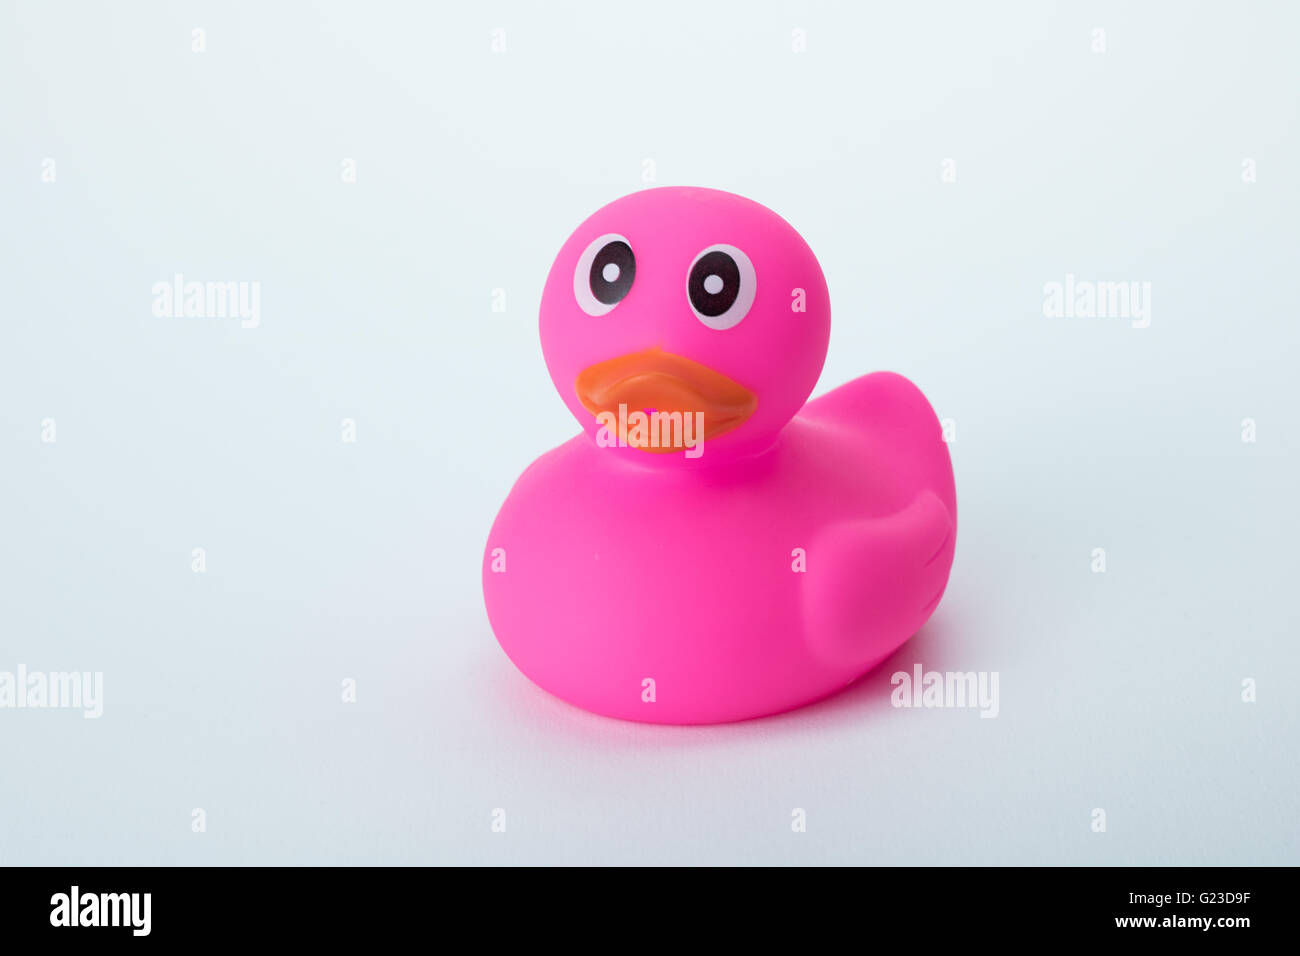 Bright pink rubber duck Stock Photo